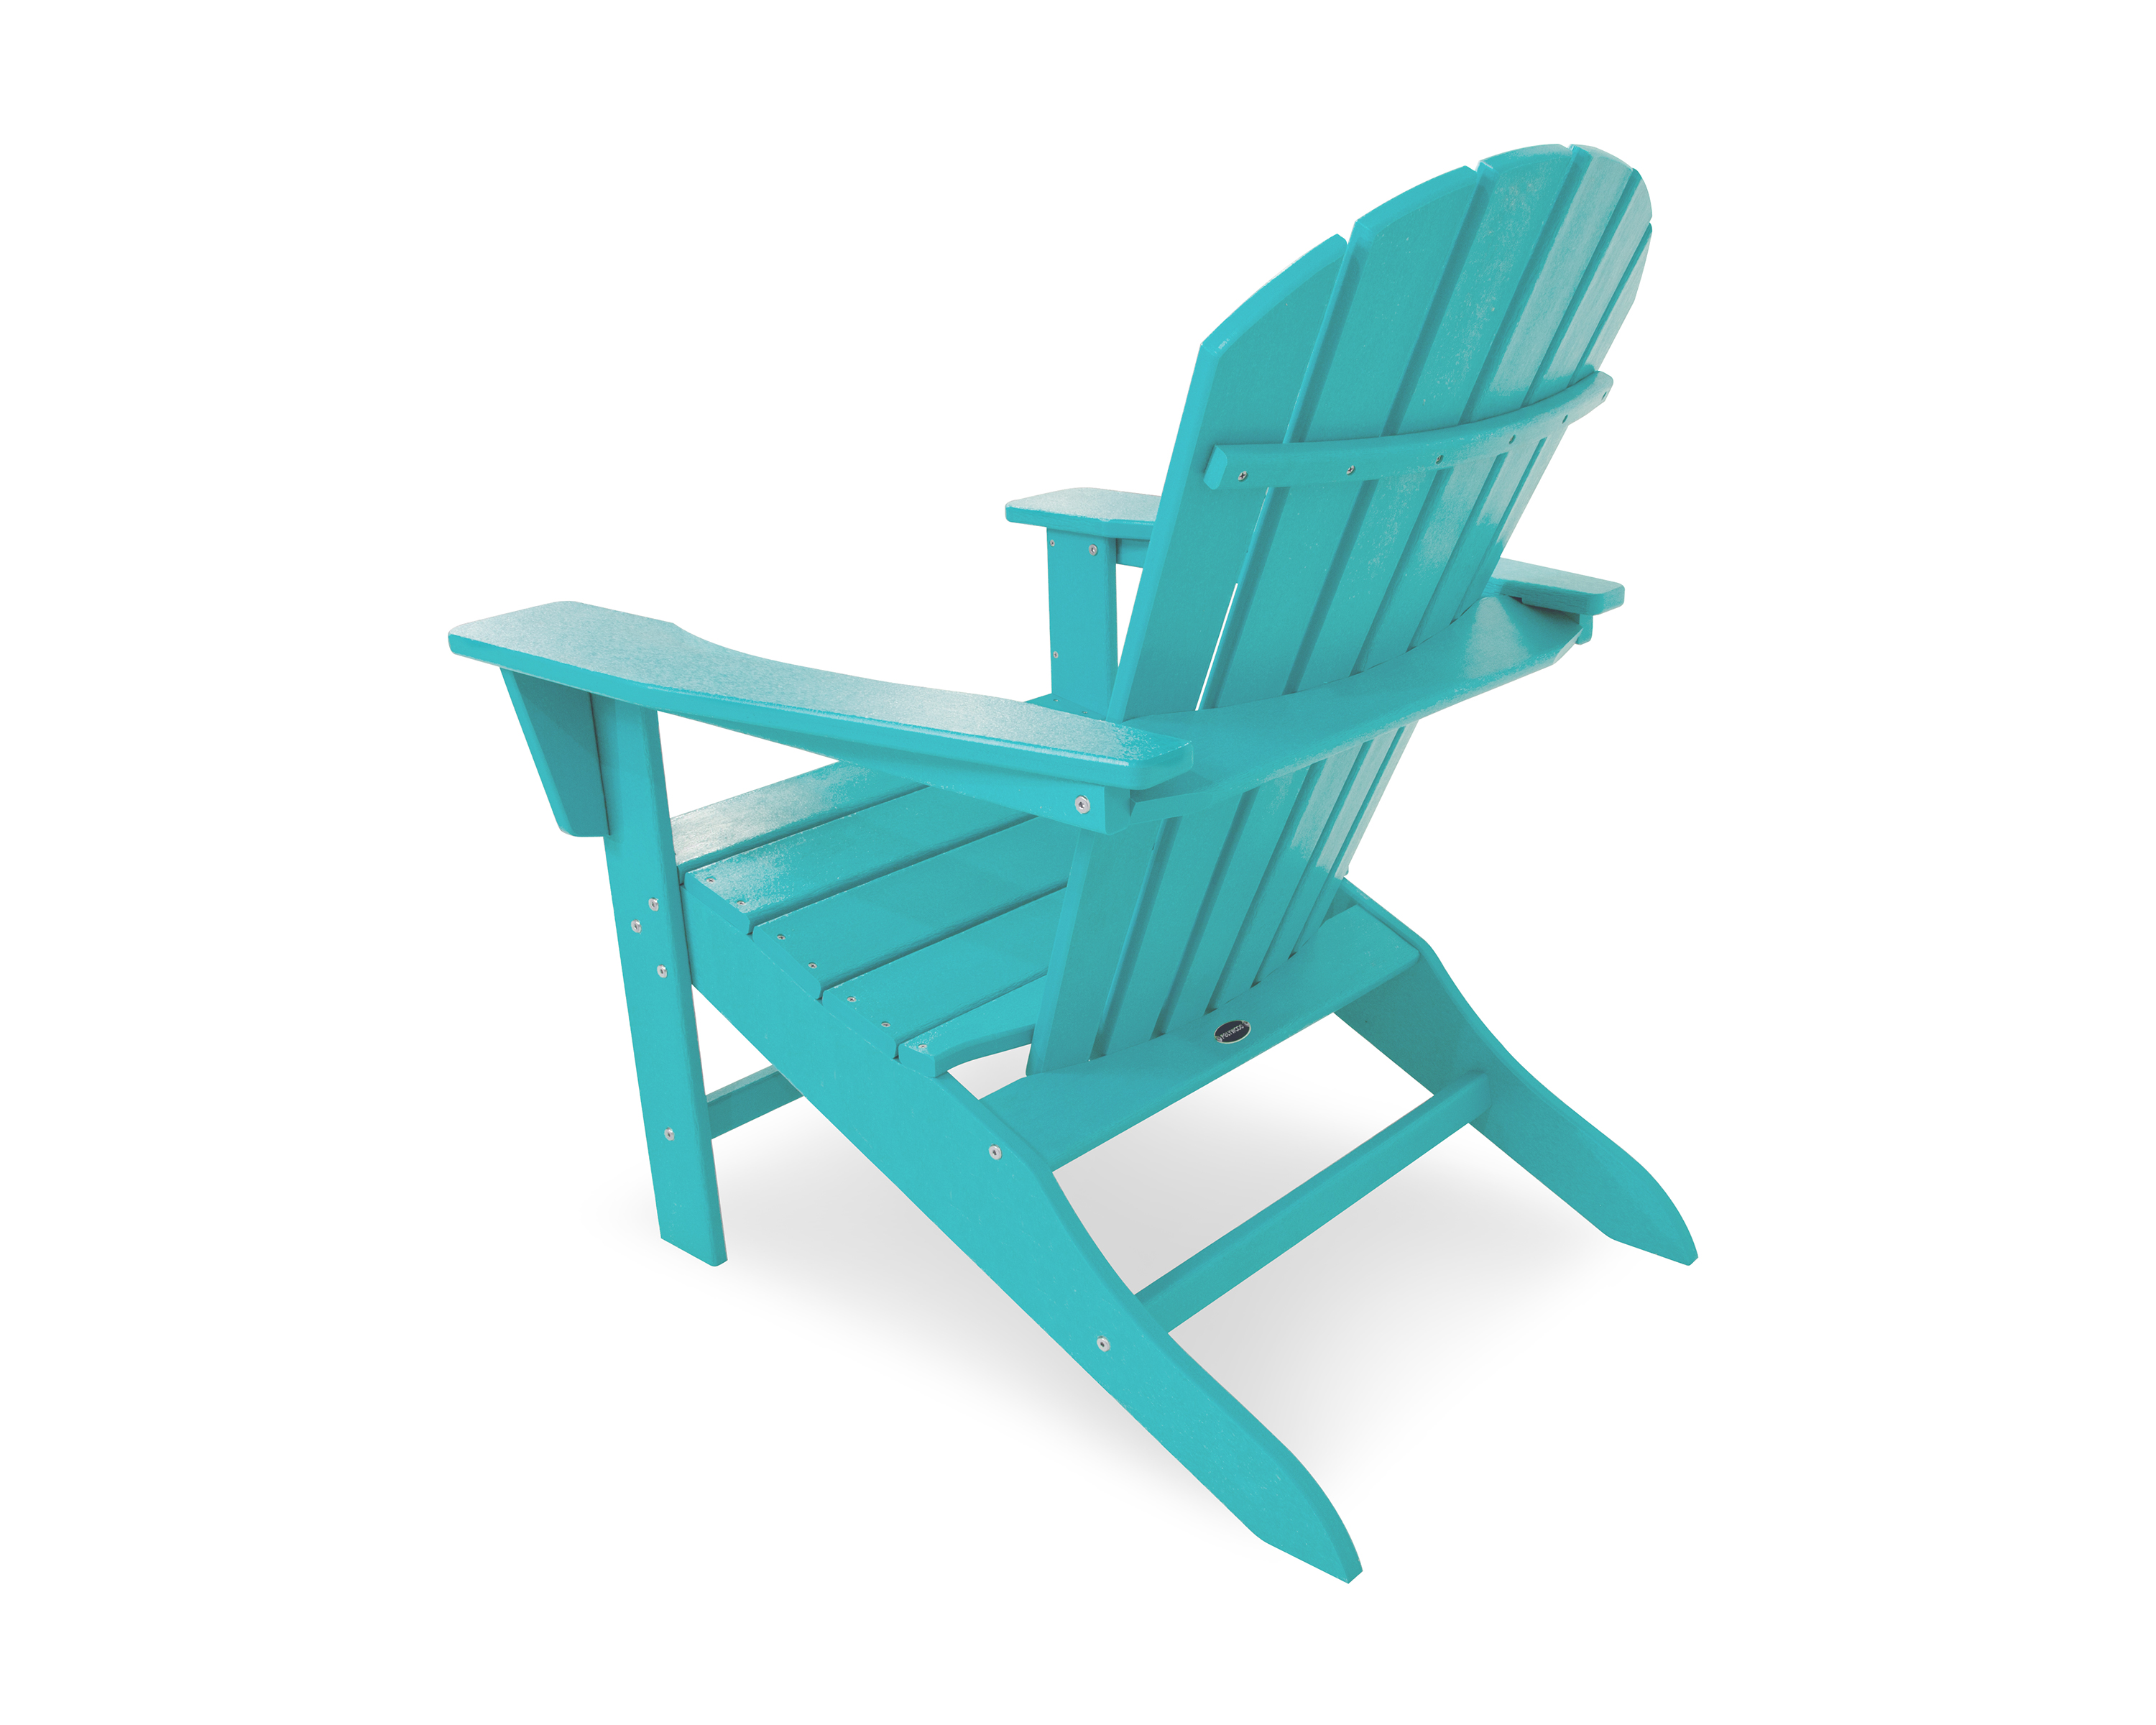 Beach Bodies Will Enjoy The Roomy Seat And Curved Back Of This Comfortable Chair. Polywood Furniture Is Constructed Of Solid Polywood Lumber That